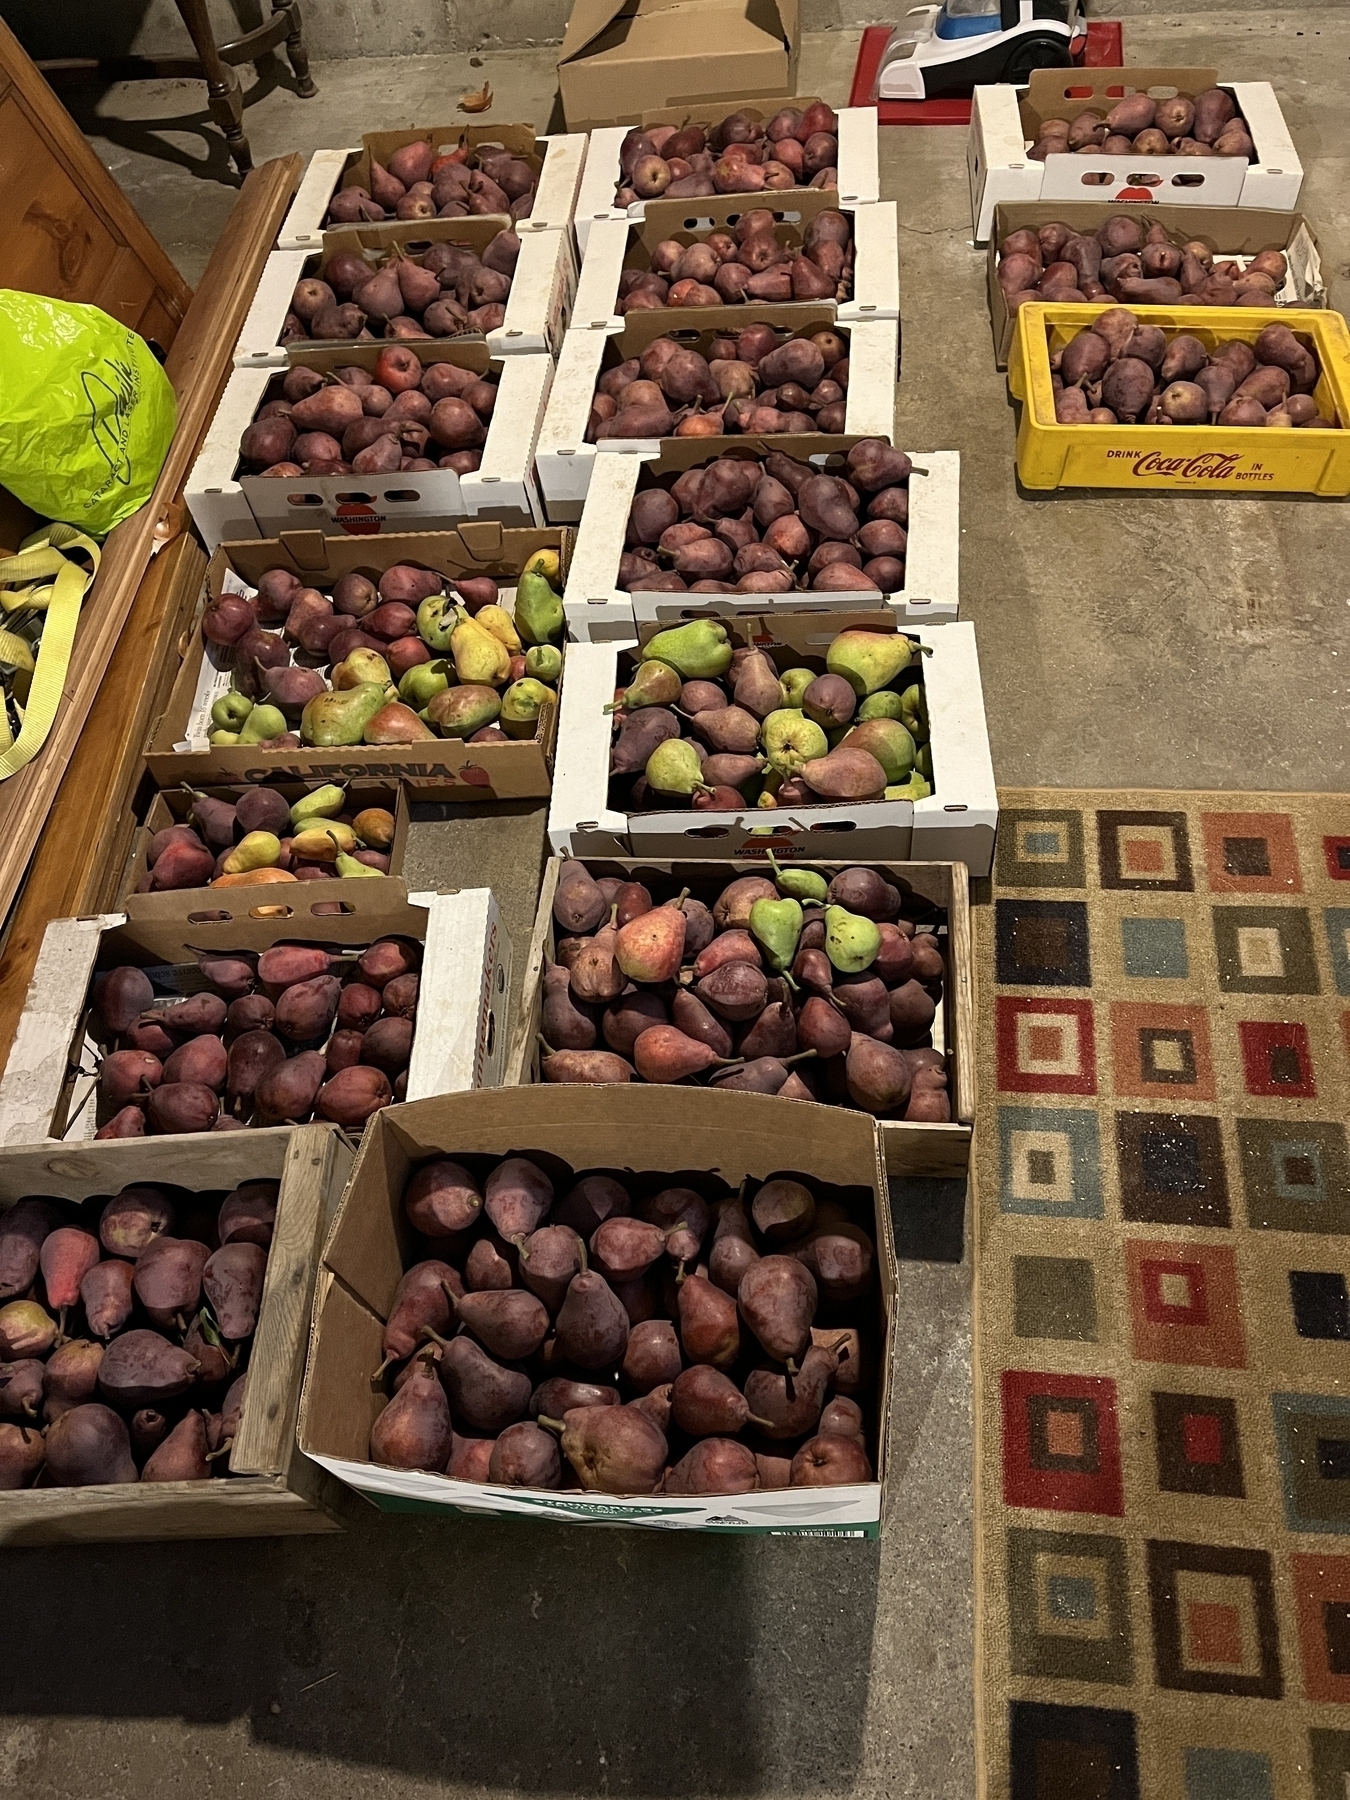 Boxes of red pears